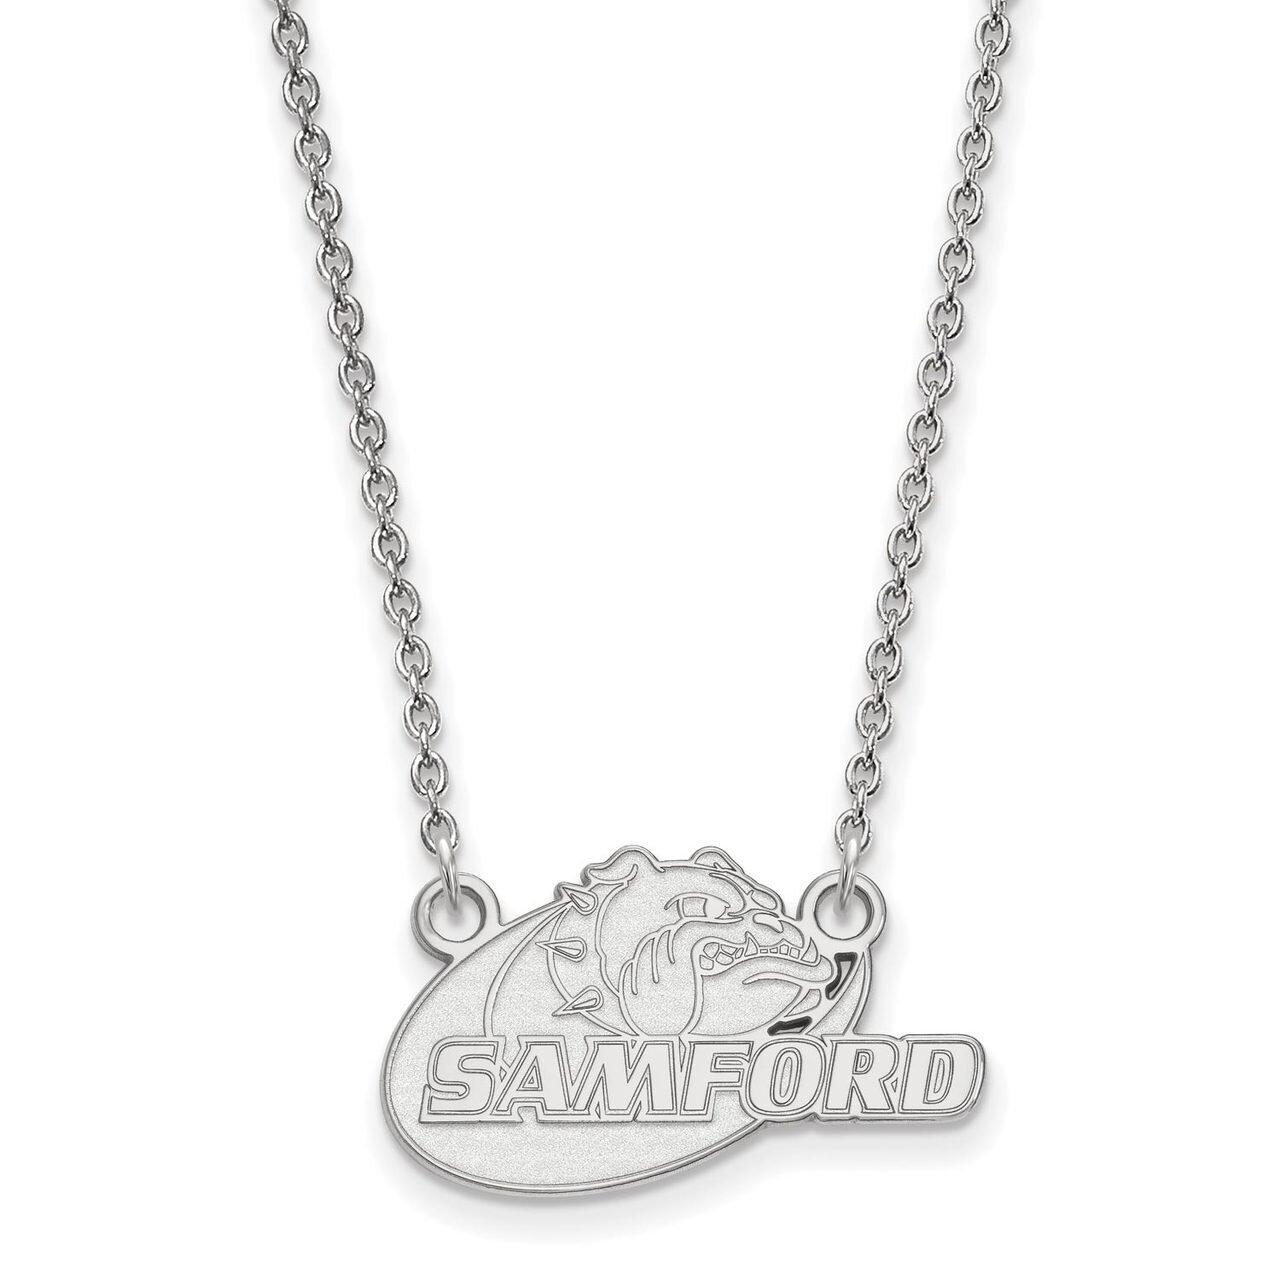 Samford University Small Pendant with Chain Necklace 10k White Gold 1W007SMF-18